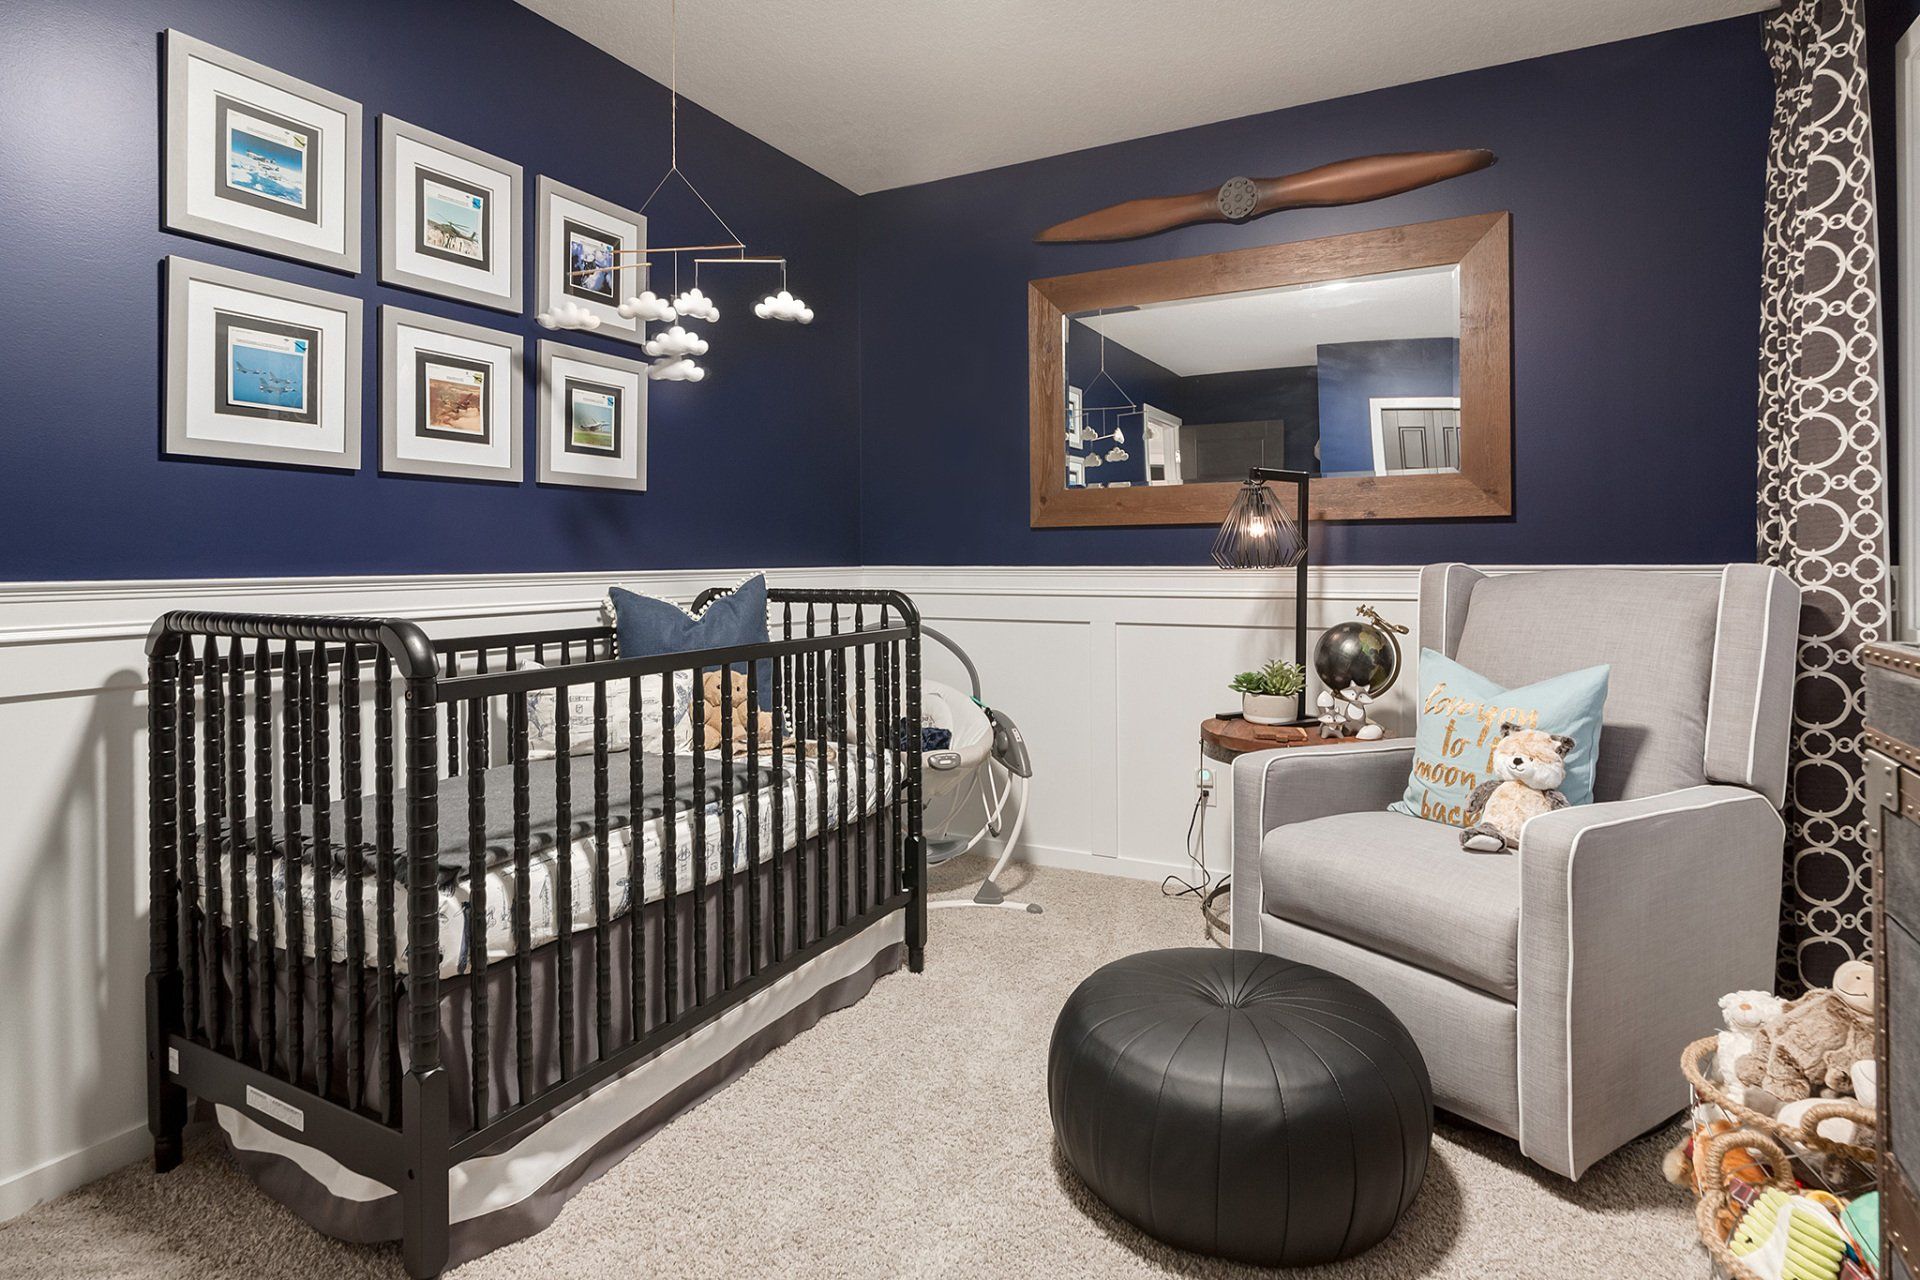 Kids and Playroom by Kaitlyn Harris - Decorating Life | Design